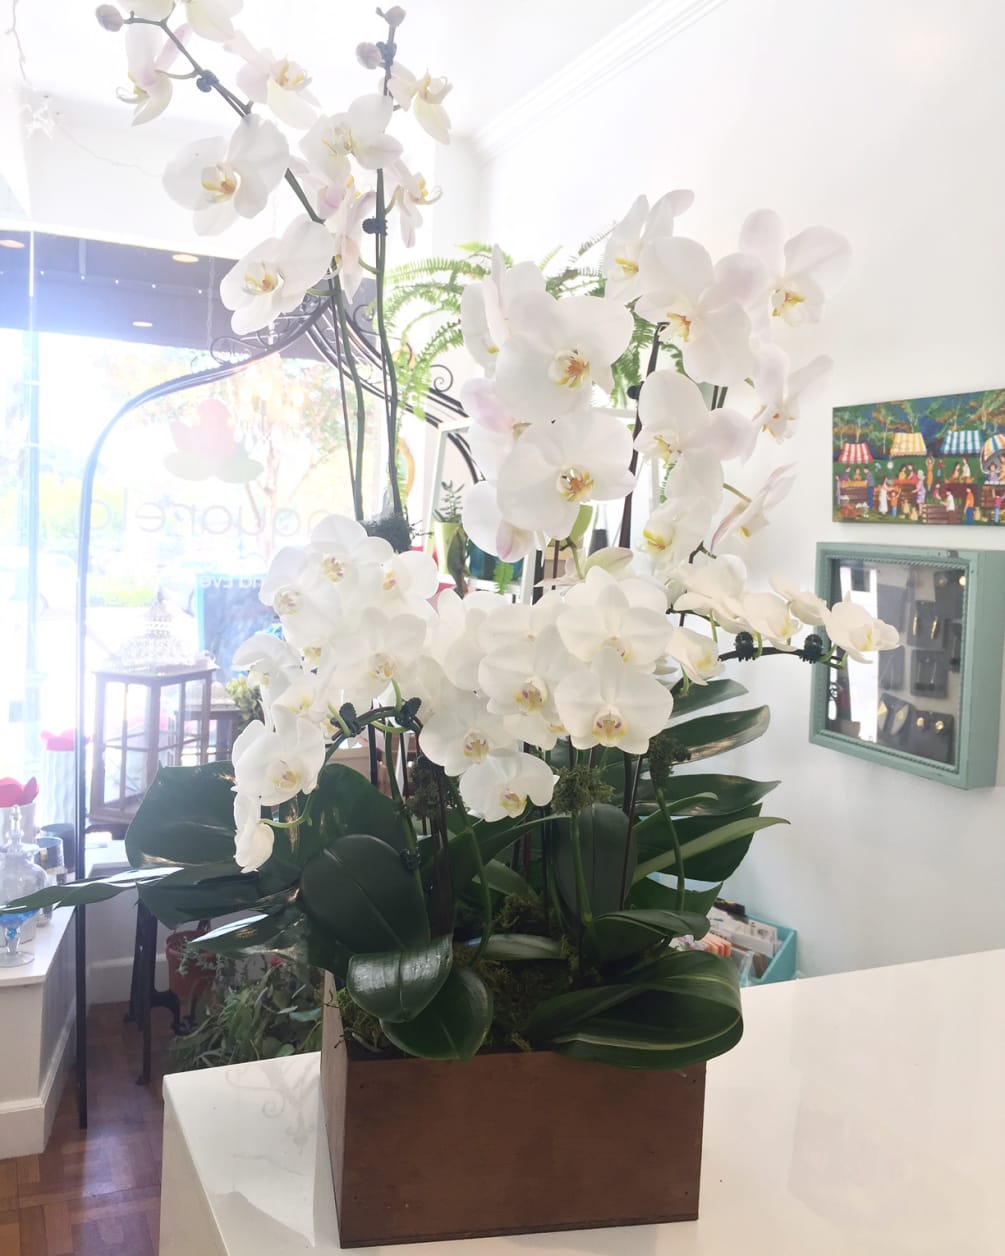 Elegant and meaningful mix of white orchids, different sizes in a recycled